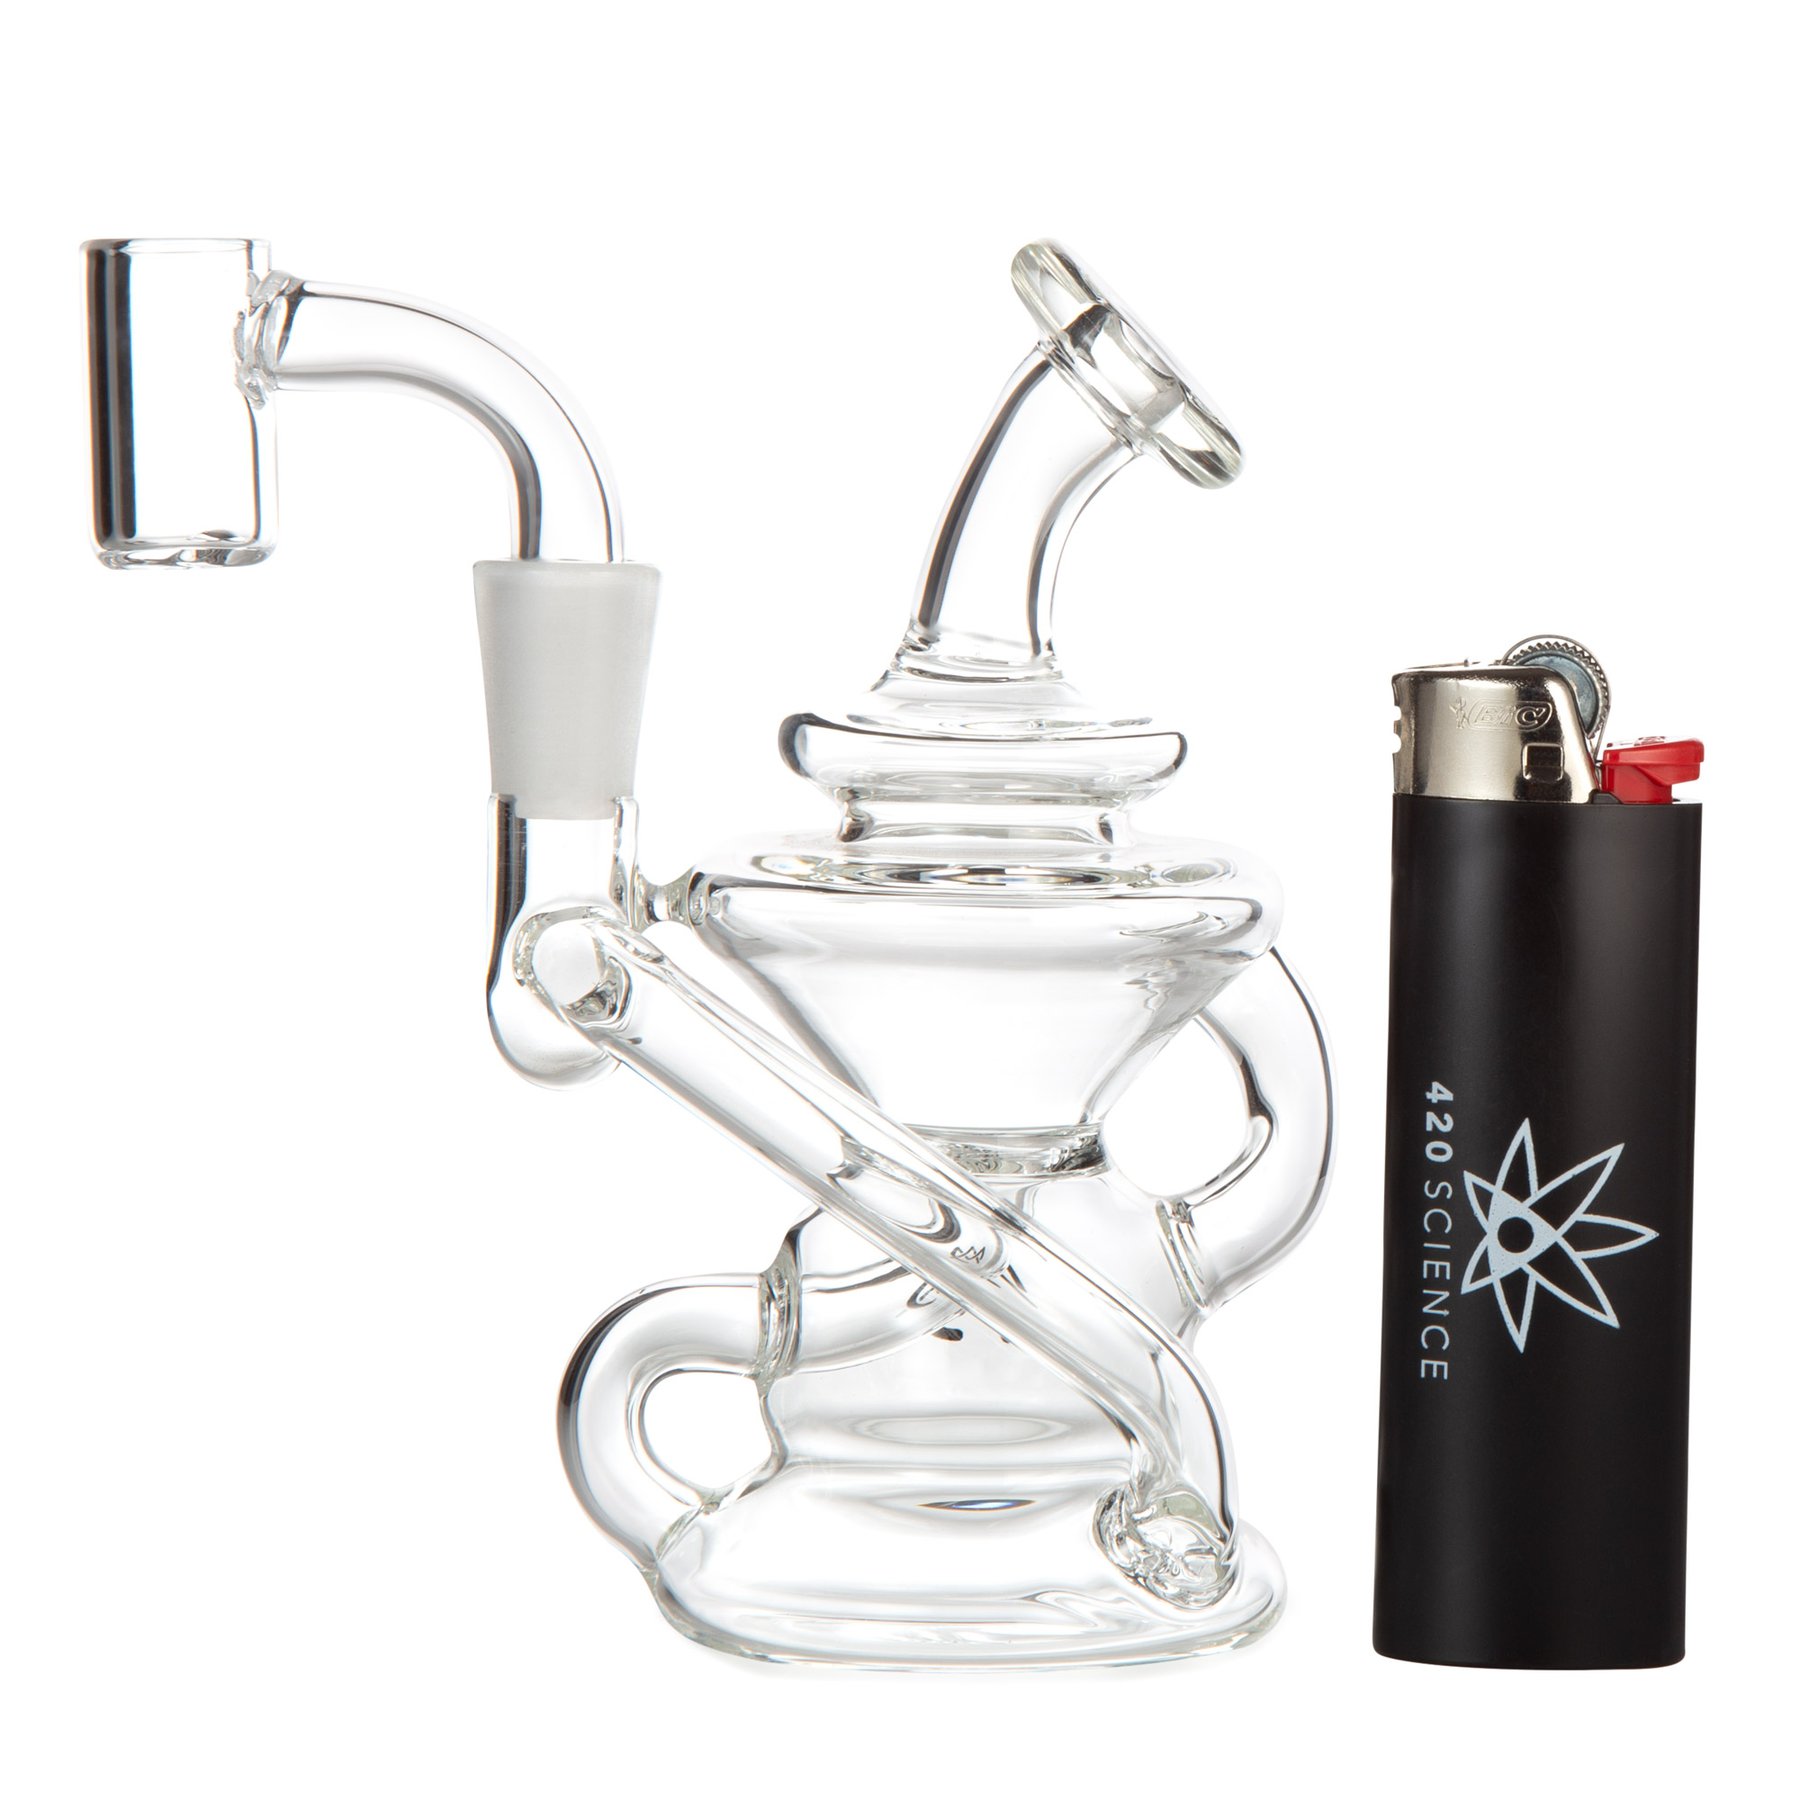 Mj Arsenal 'Hydra' Mini Rig / $ 39.99 Available At 420 Science